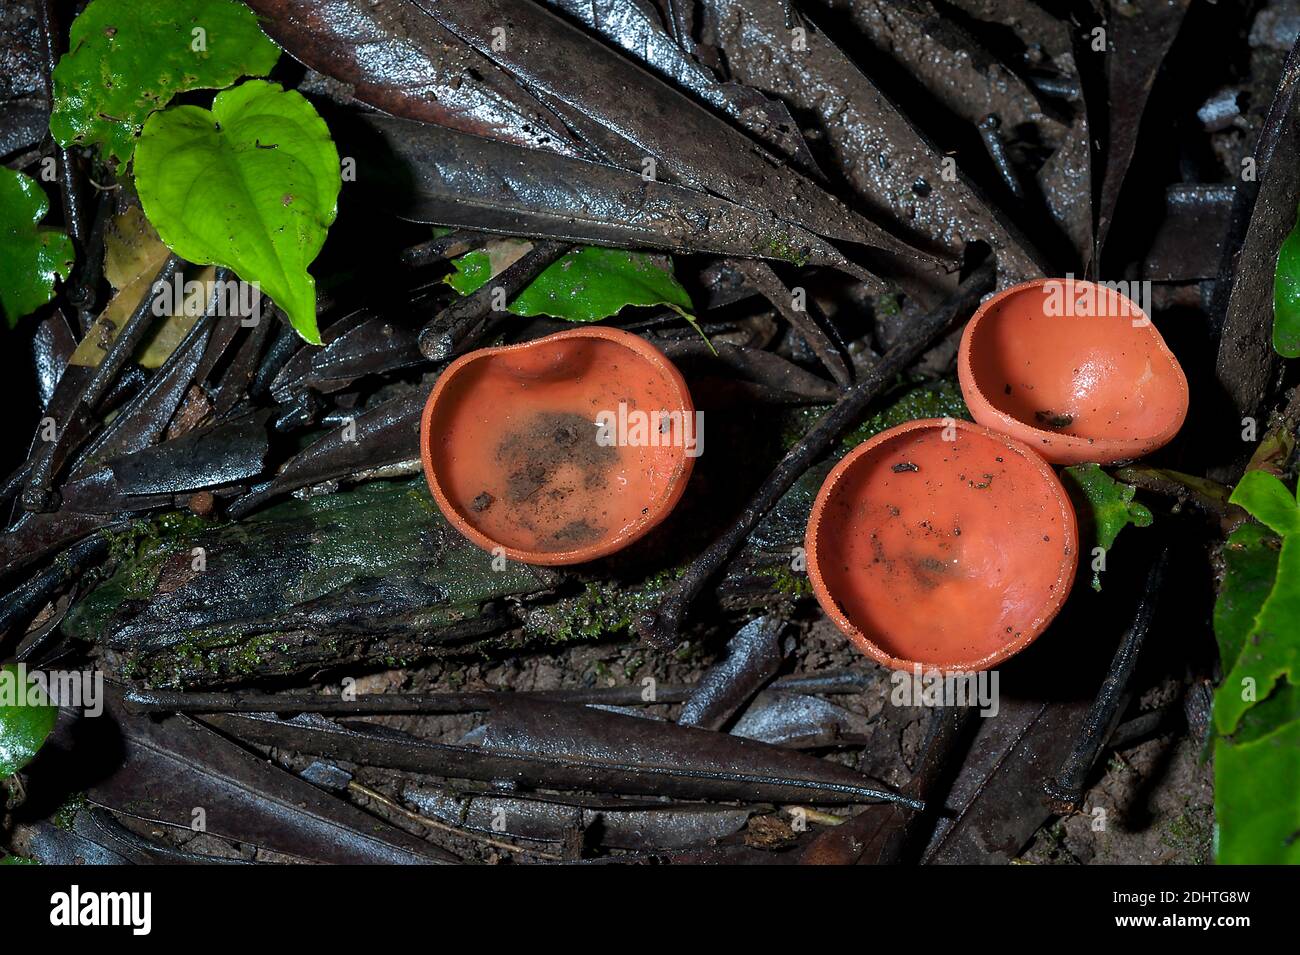 Cookenia sp. (possibly C. speciosa) from the rainforest floor of eastern Ecuador. Stock Photo